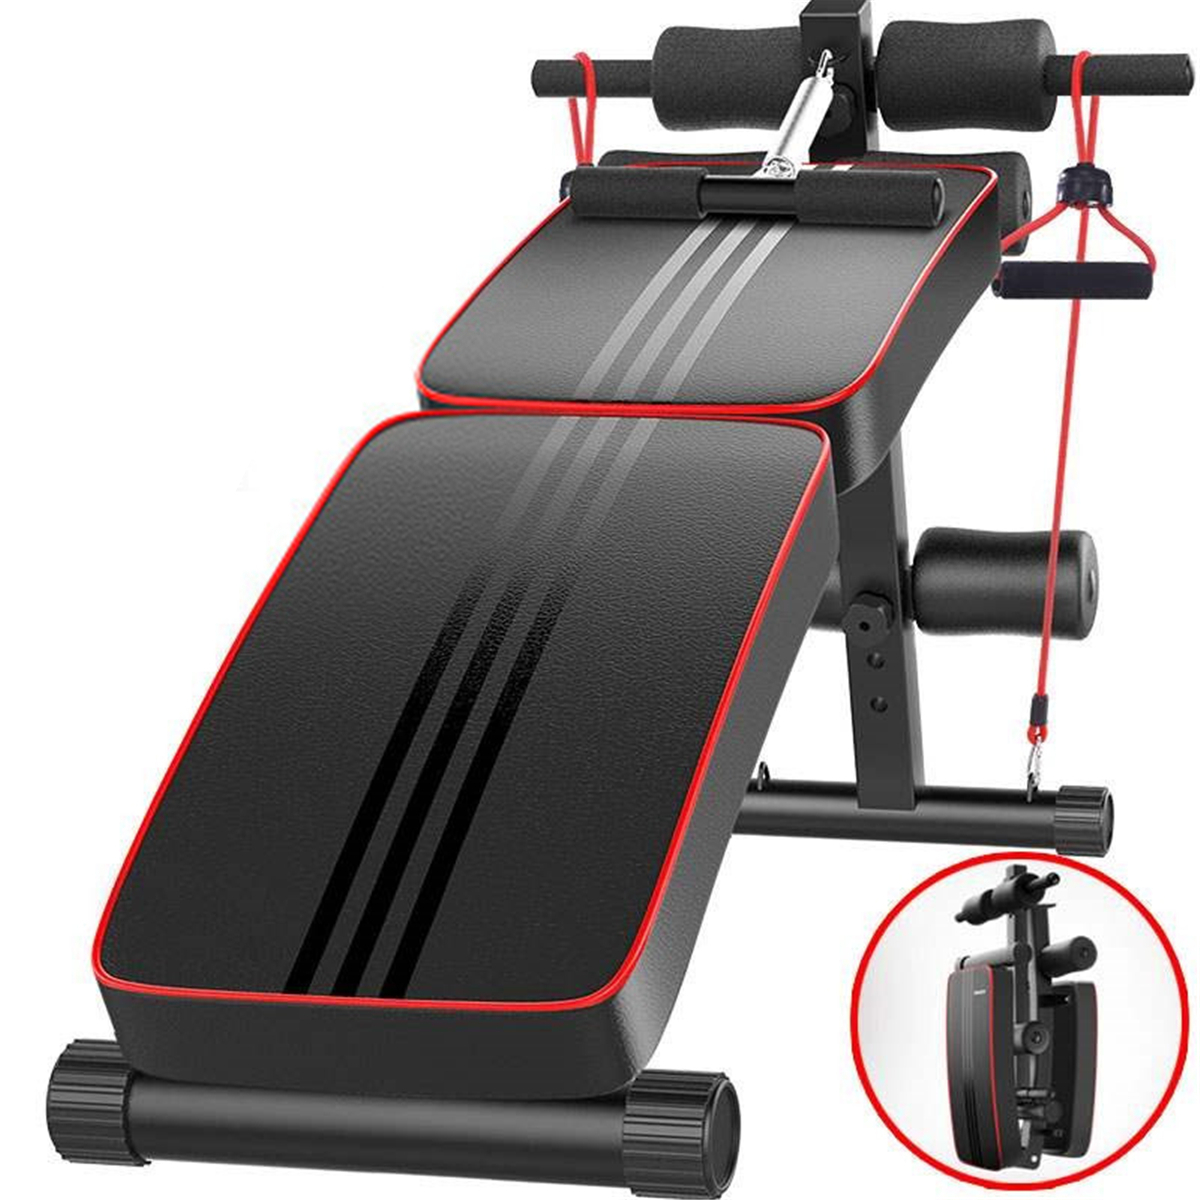 

Everfit Adjustable Sit Up Bench Press Weight Gym Home Exercise Fitness Exercise Equitment Tools